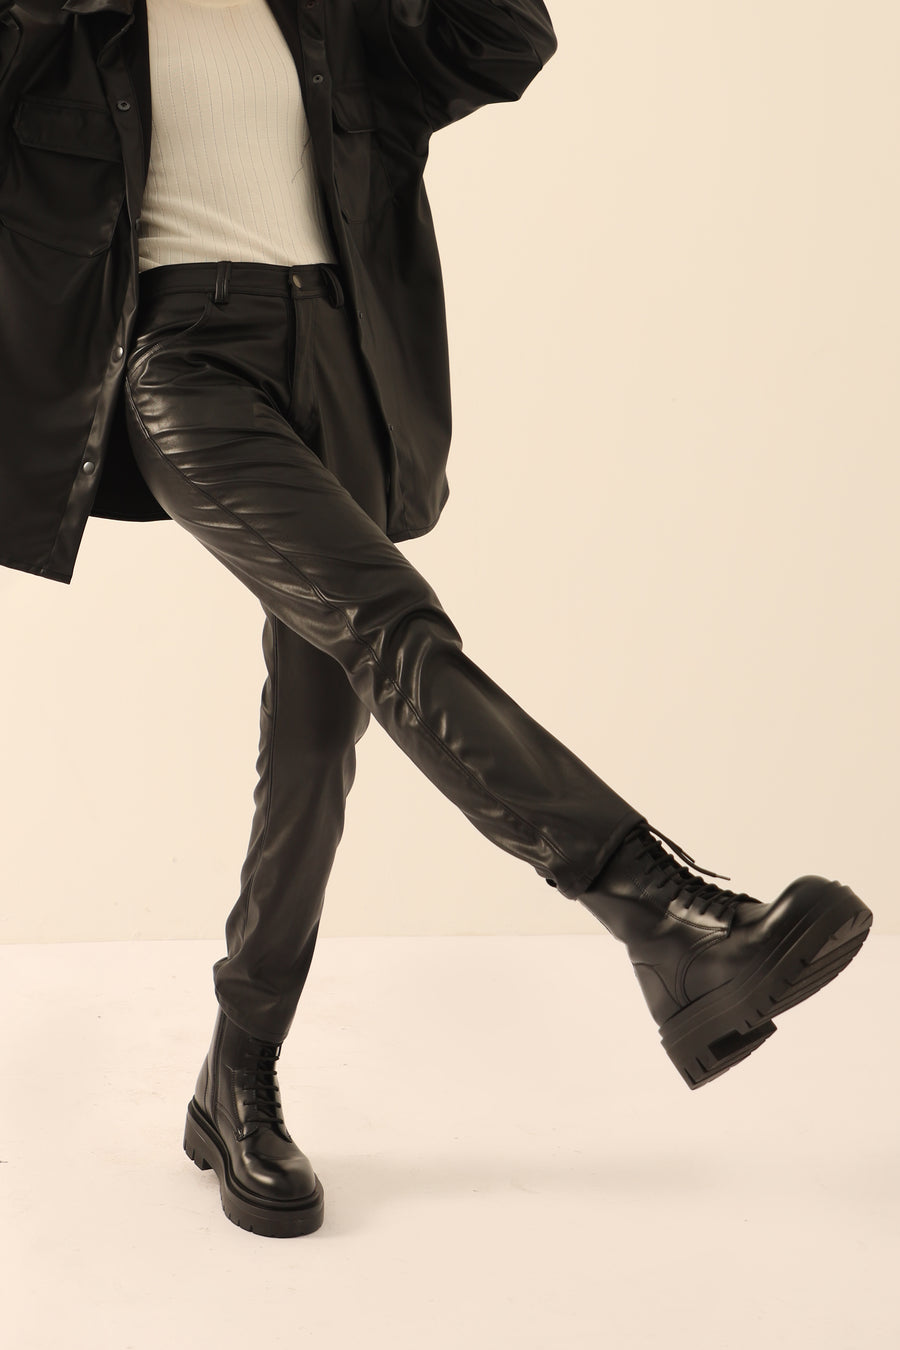 LuxeLine Leather Pants Black (10 days delivery time)